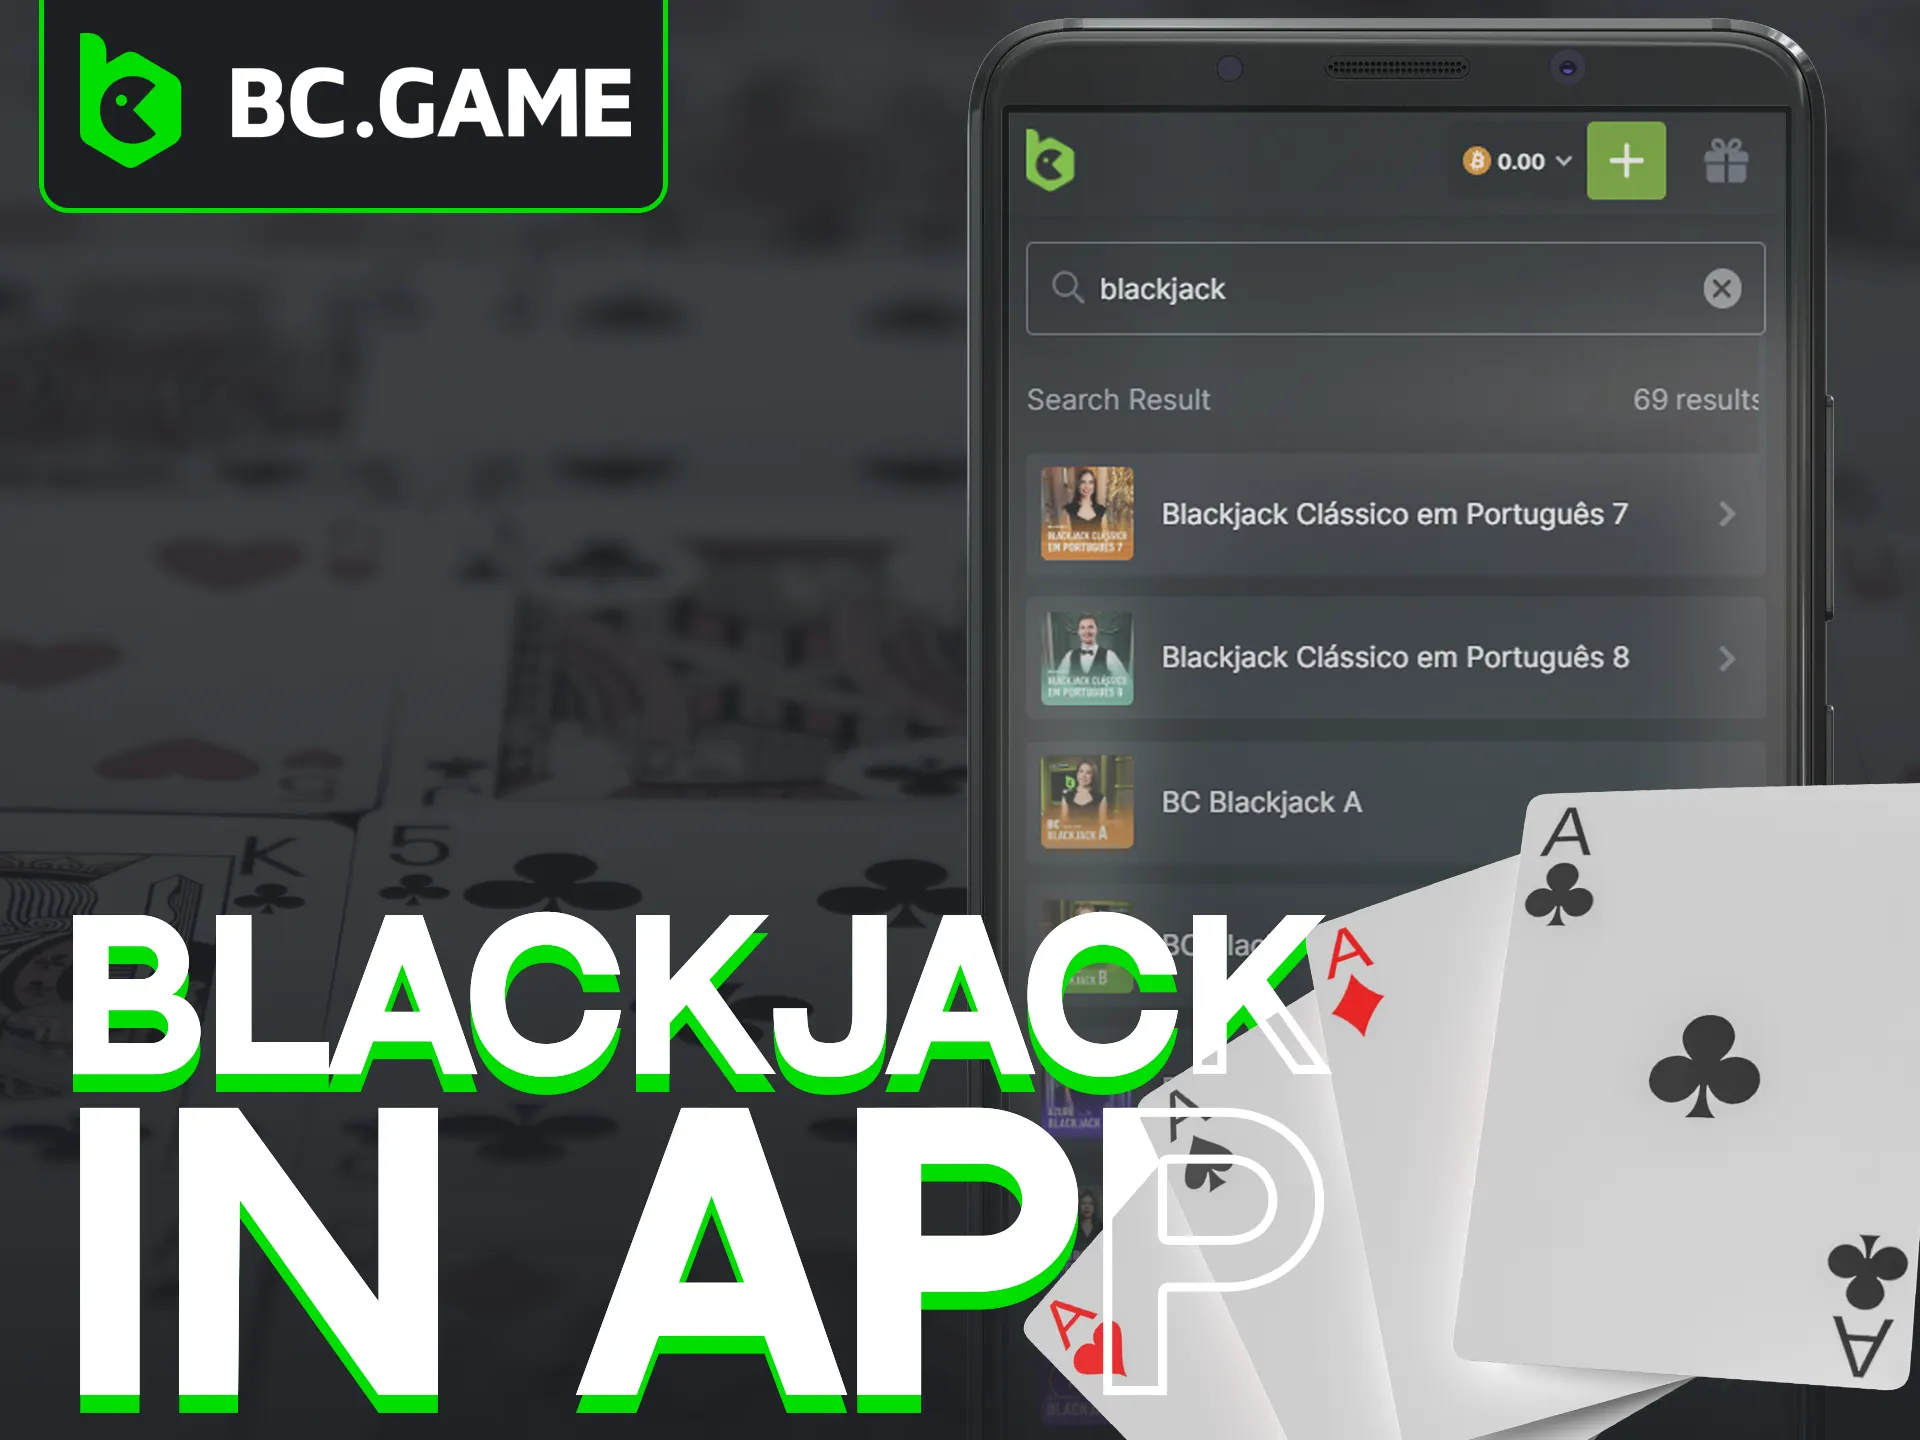 Play Blackjack on BC Game mobile site with any browser.